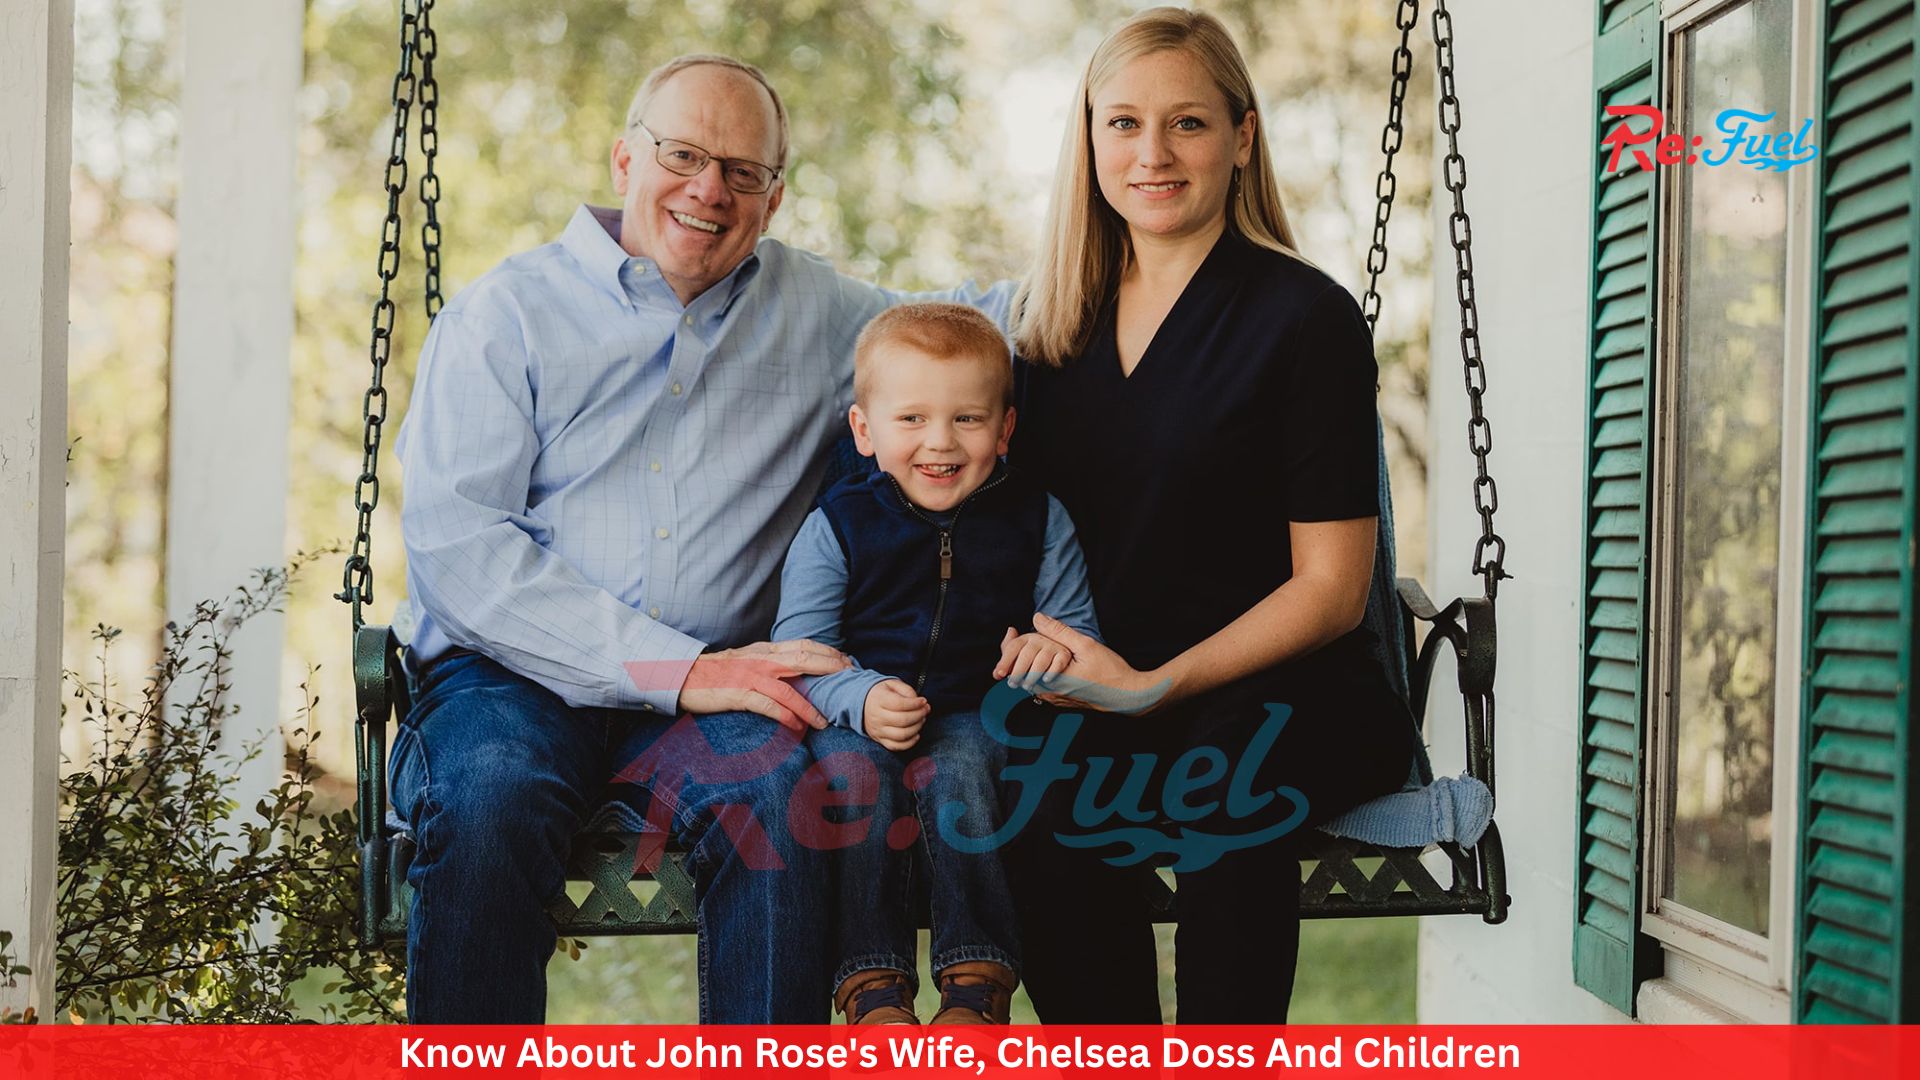 Know About John Rose's Wife, Chelsea Doss And Children